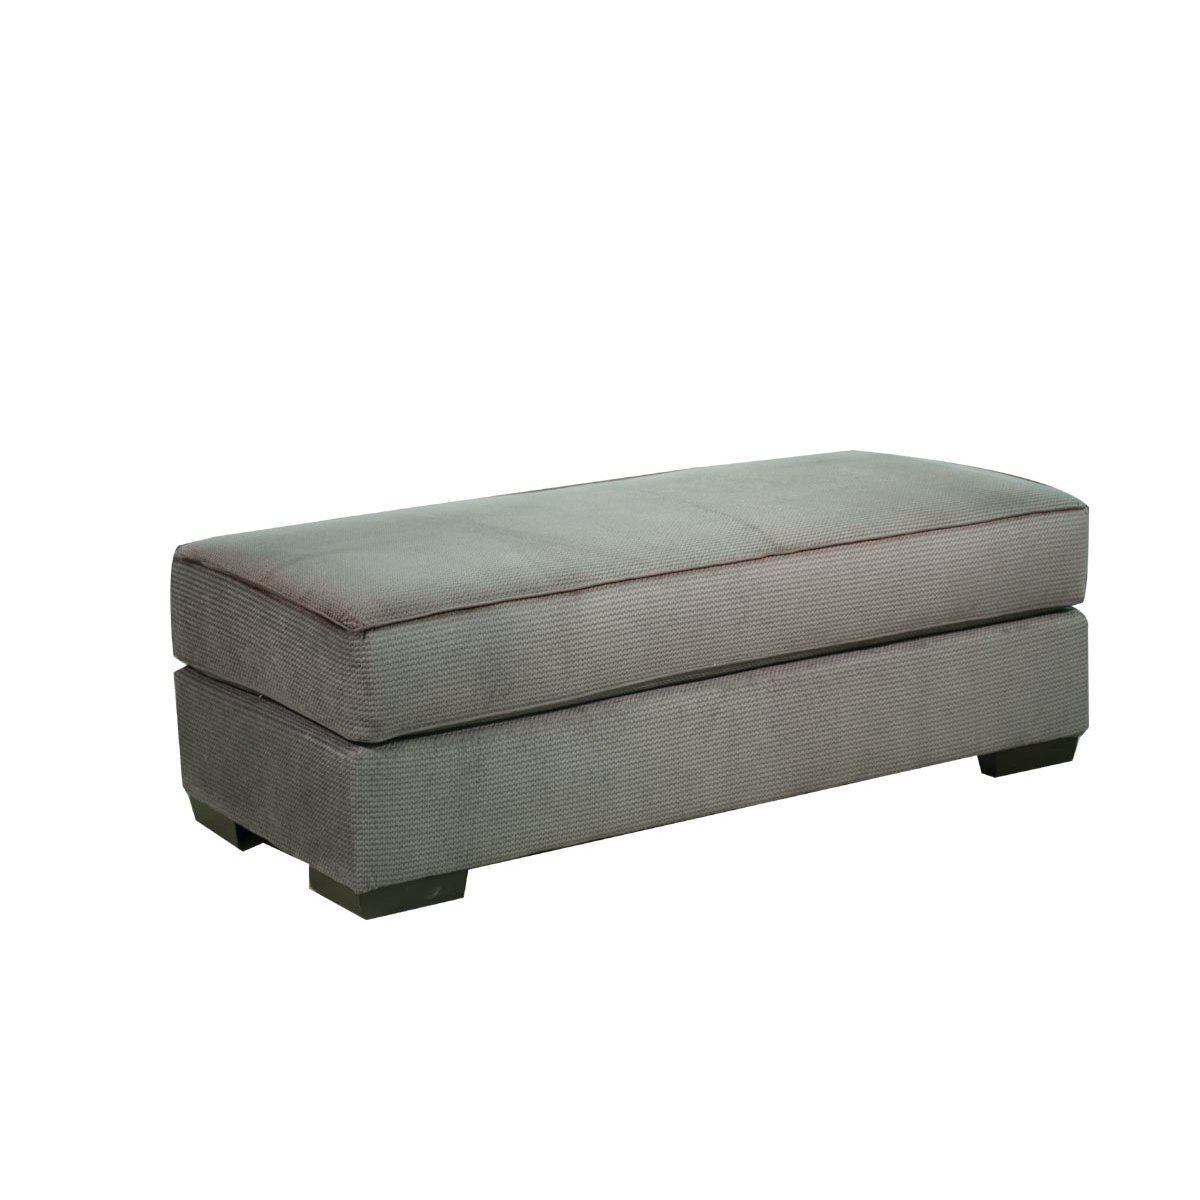 Casual Modern Charcoal Gray Ottoman – Spartan | Rc Willey Furniture Store With Charcoal And Light Gray Cotton Pouf Ottomans (View 14 of 20)